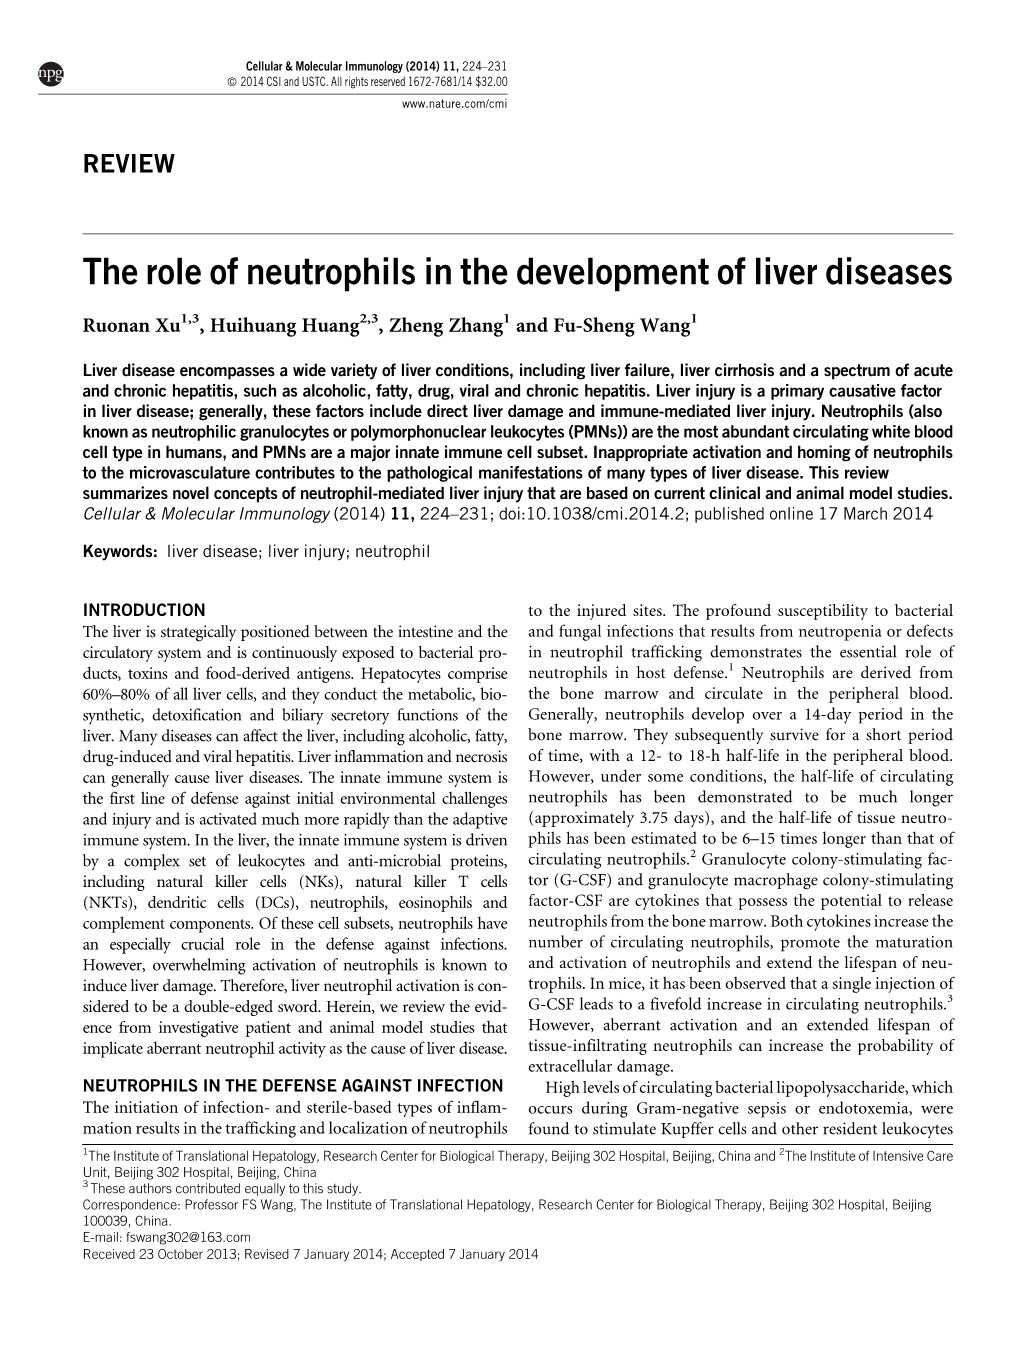 The Role of Neutrophils in the Development of Liver Diseases